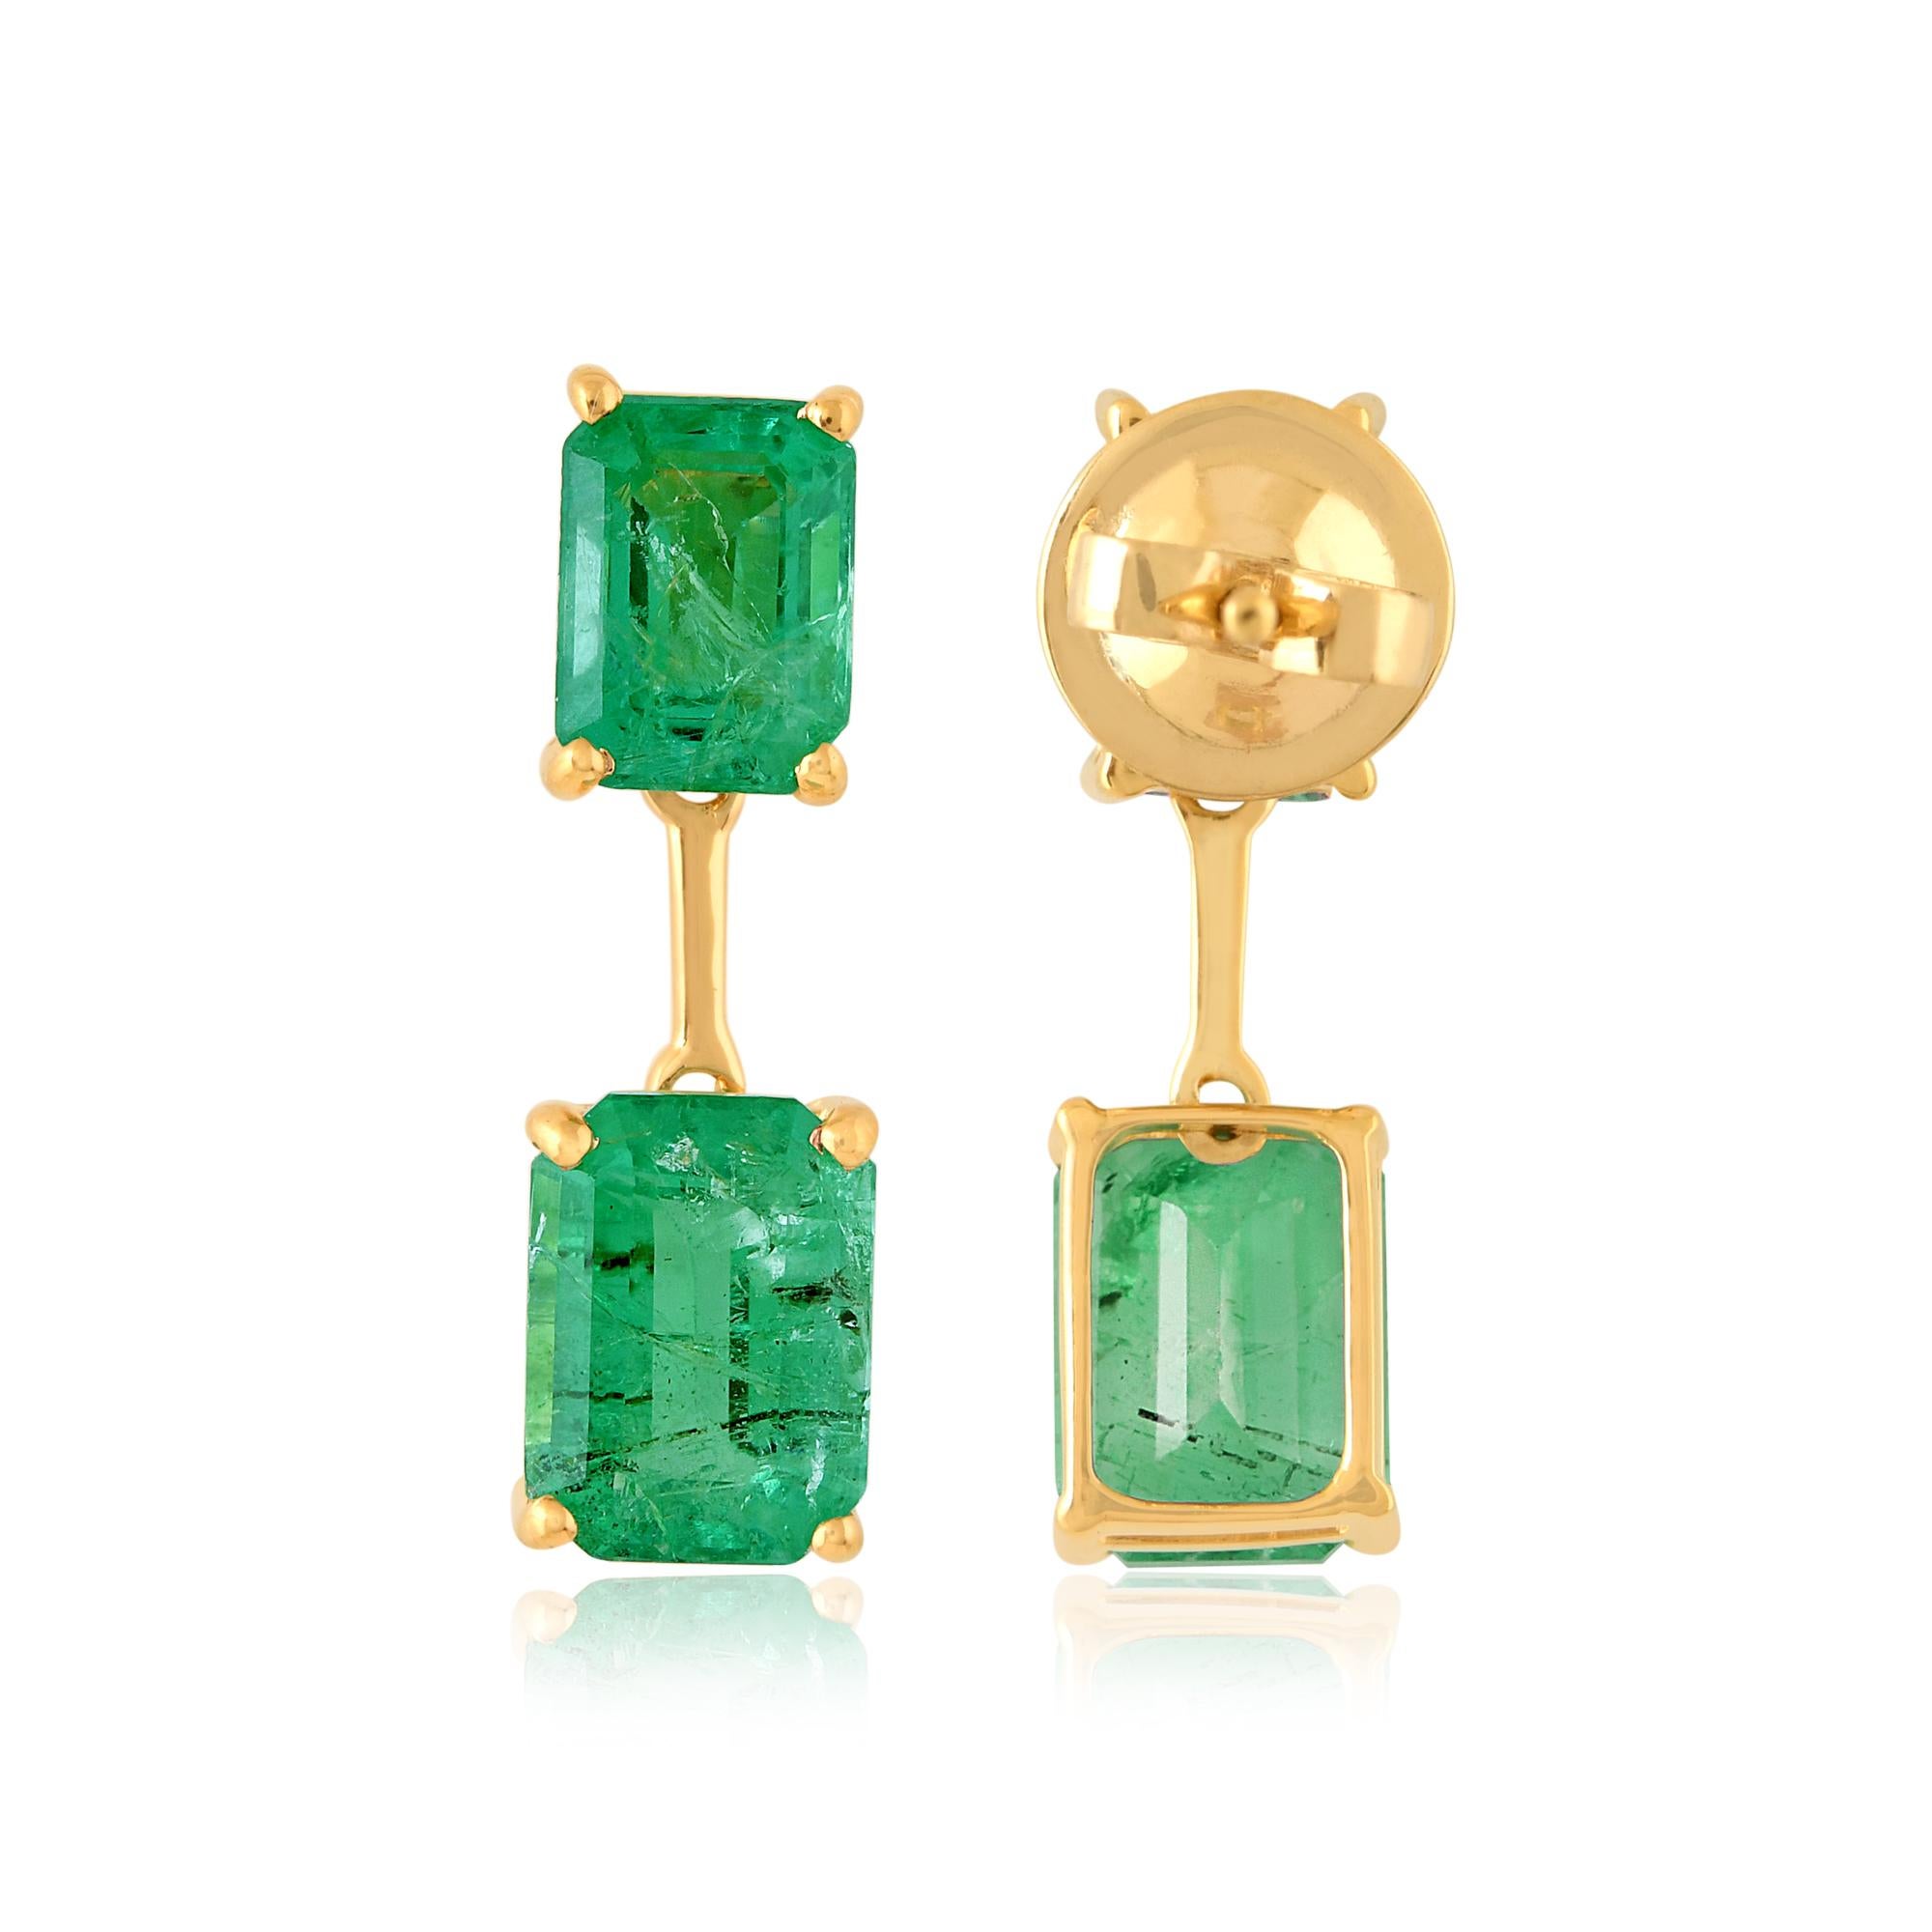 Item Code :- SEE-1777
Gross Weight :- 4.20 gm
18k Yellow Gold Weight :- 3.26 gm
Emerald Weight :- 4.70 Carat
Earrings Length :- 21 mm approx.

✦ Sizing
.....................
We can adjust most items to fit your sizing preferences. Most items can be